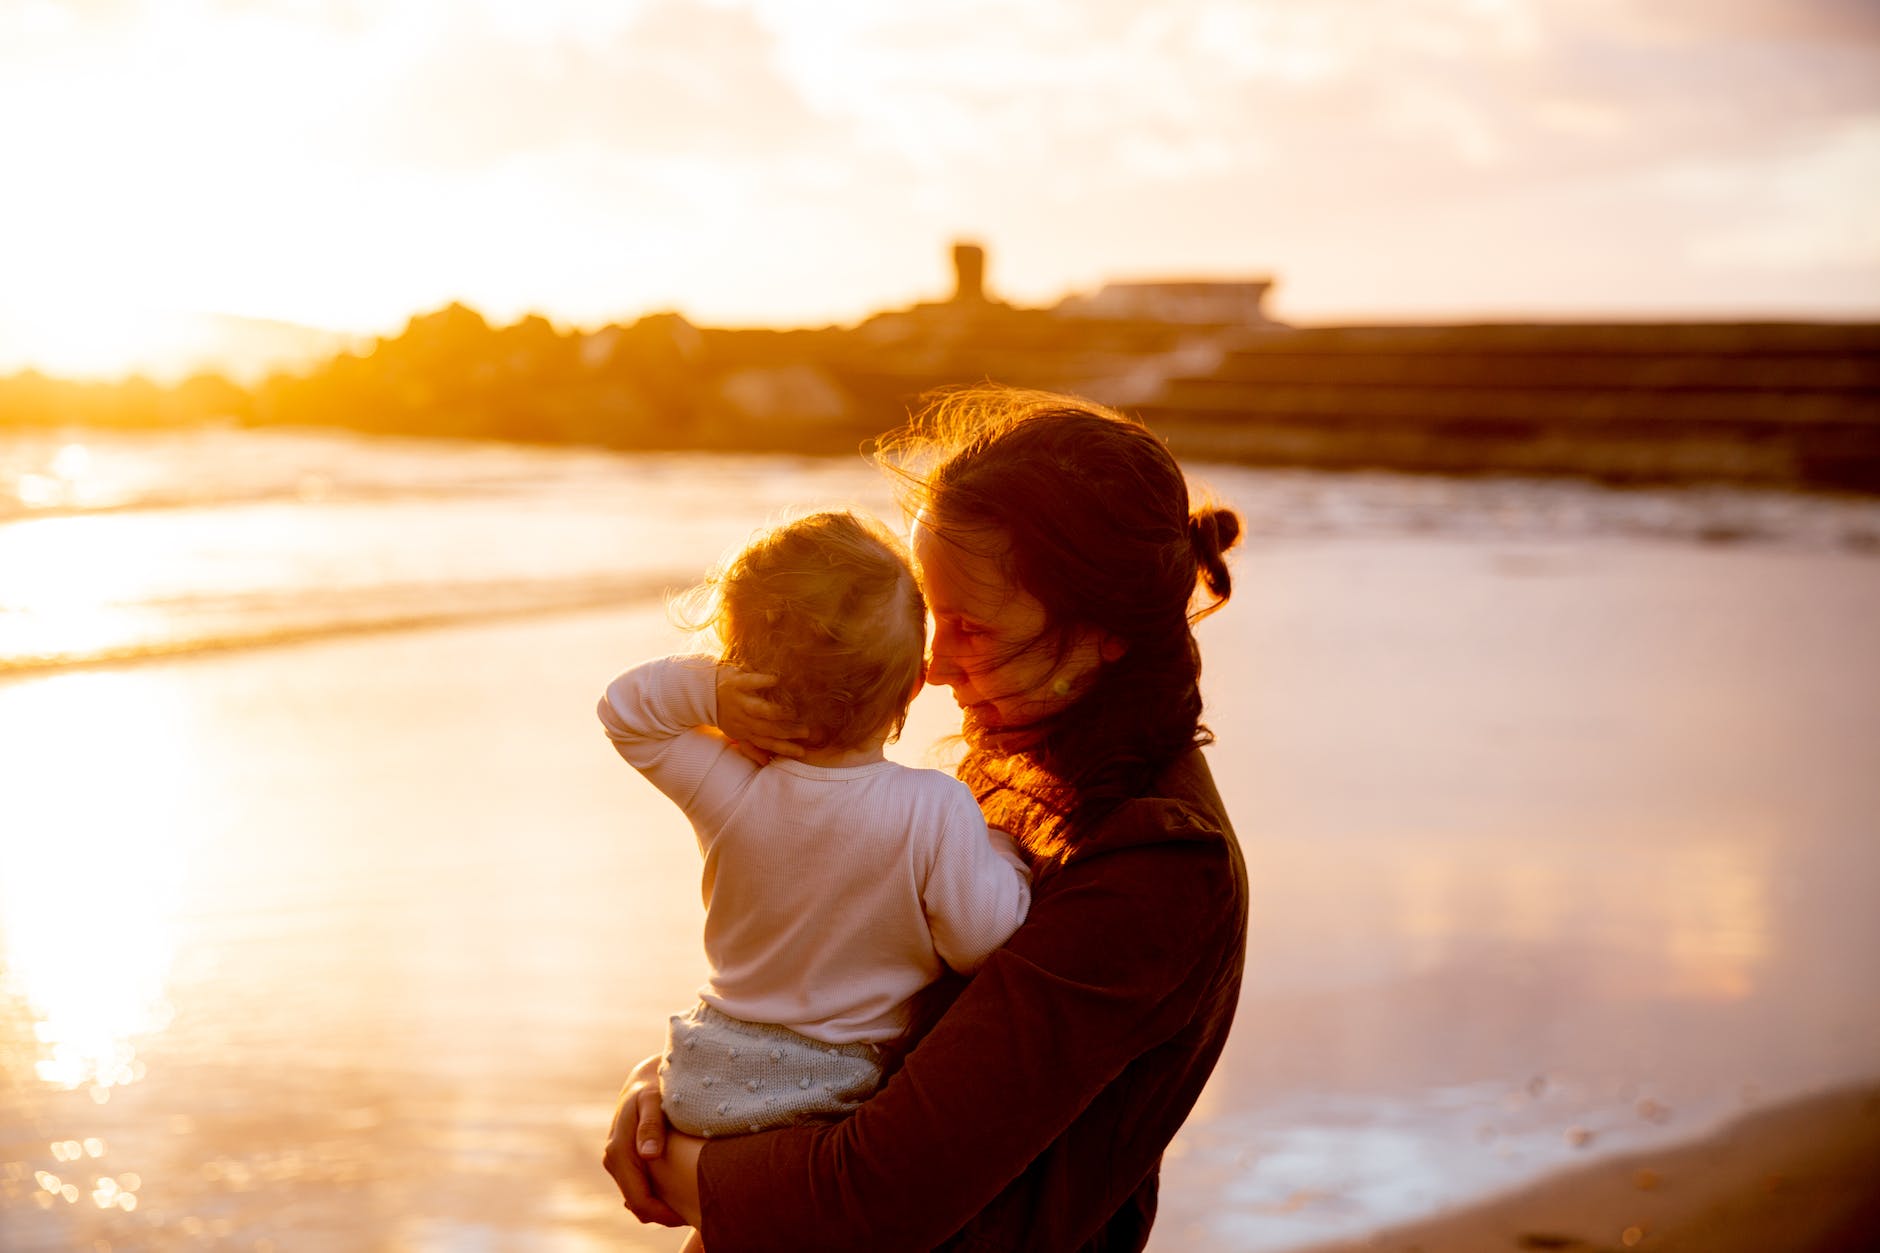 woman carrying baby in white shirt watching the sunset